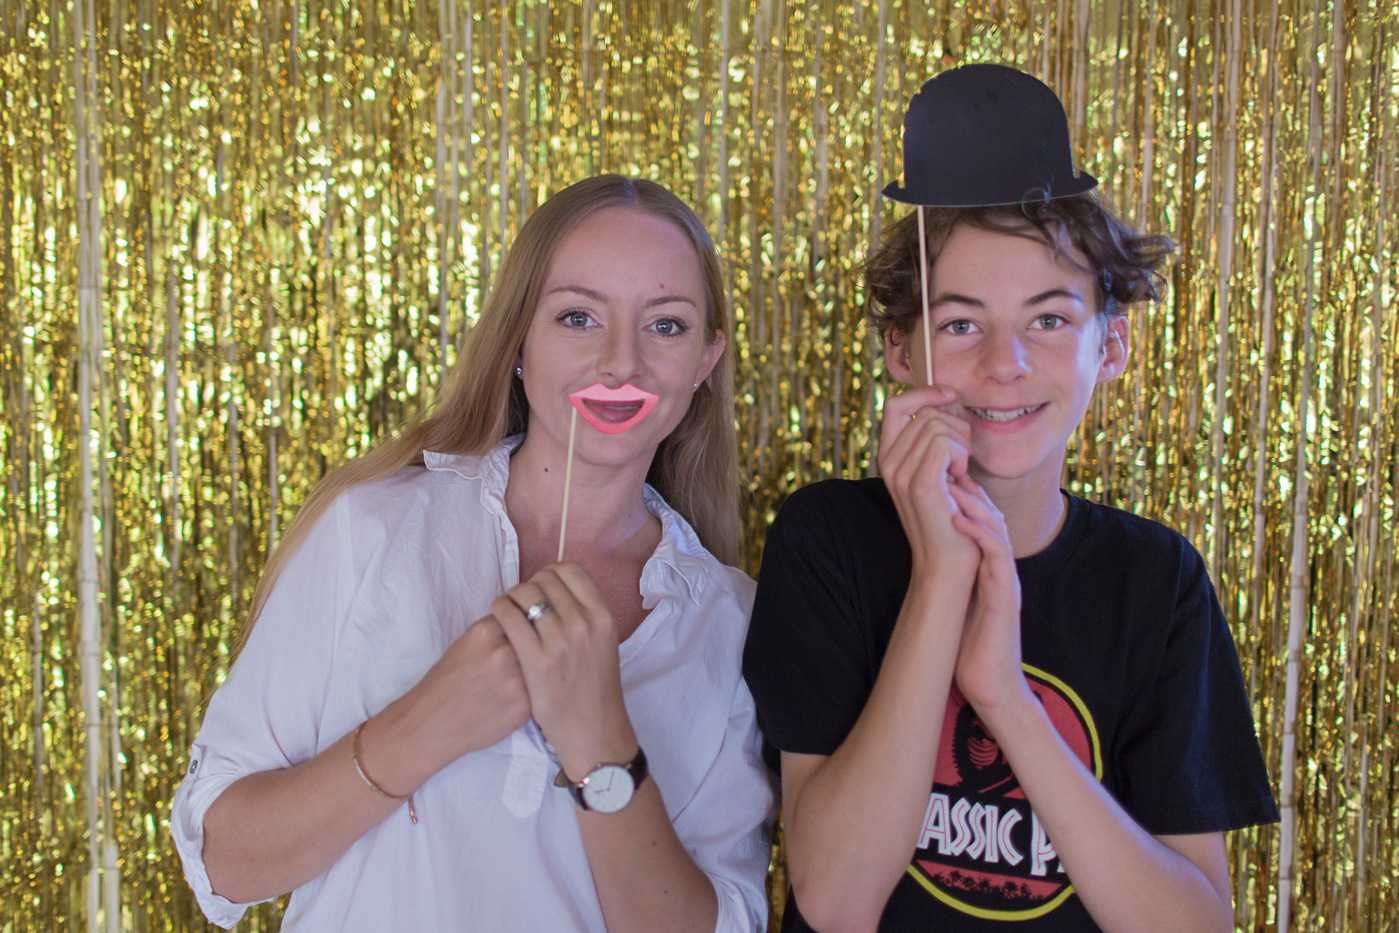 Gold foil photo backdrop and props at movie-themed party